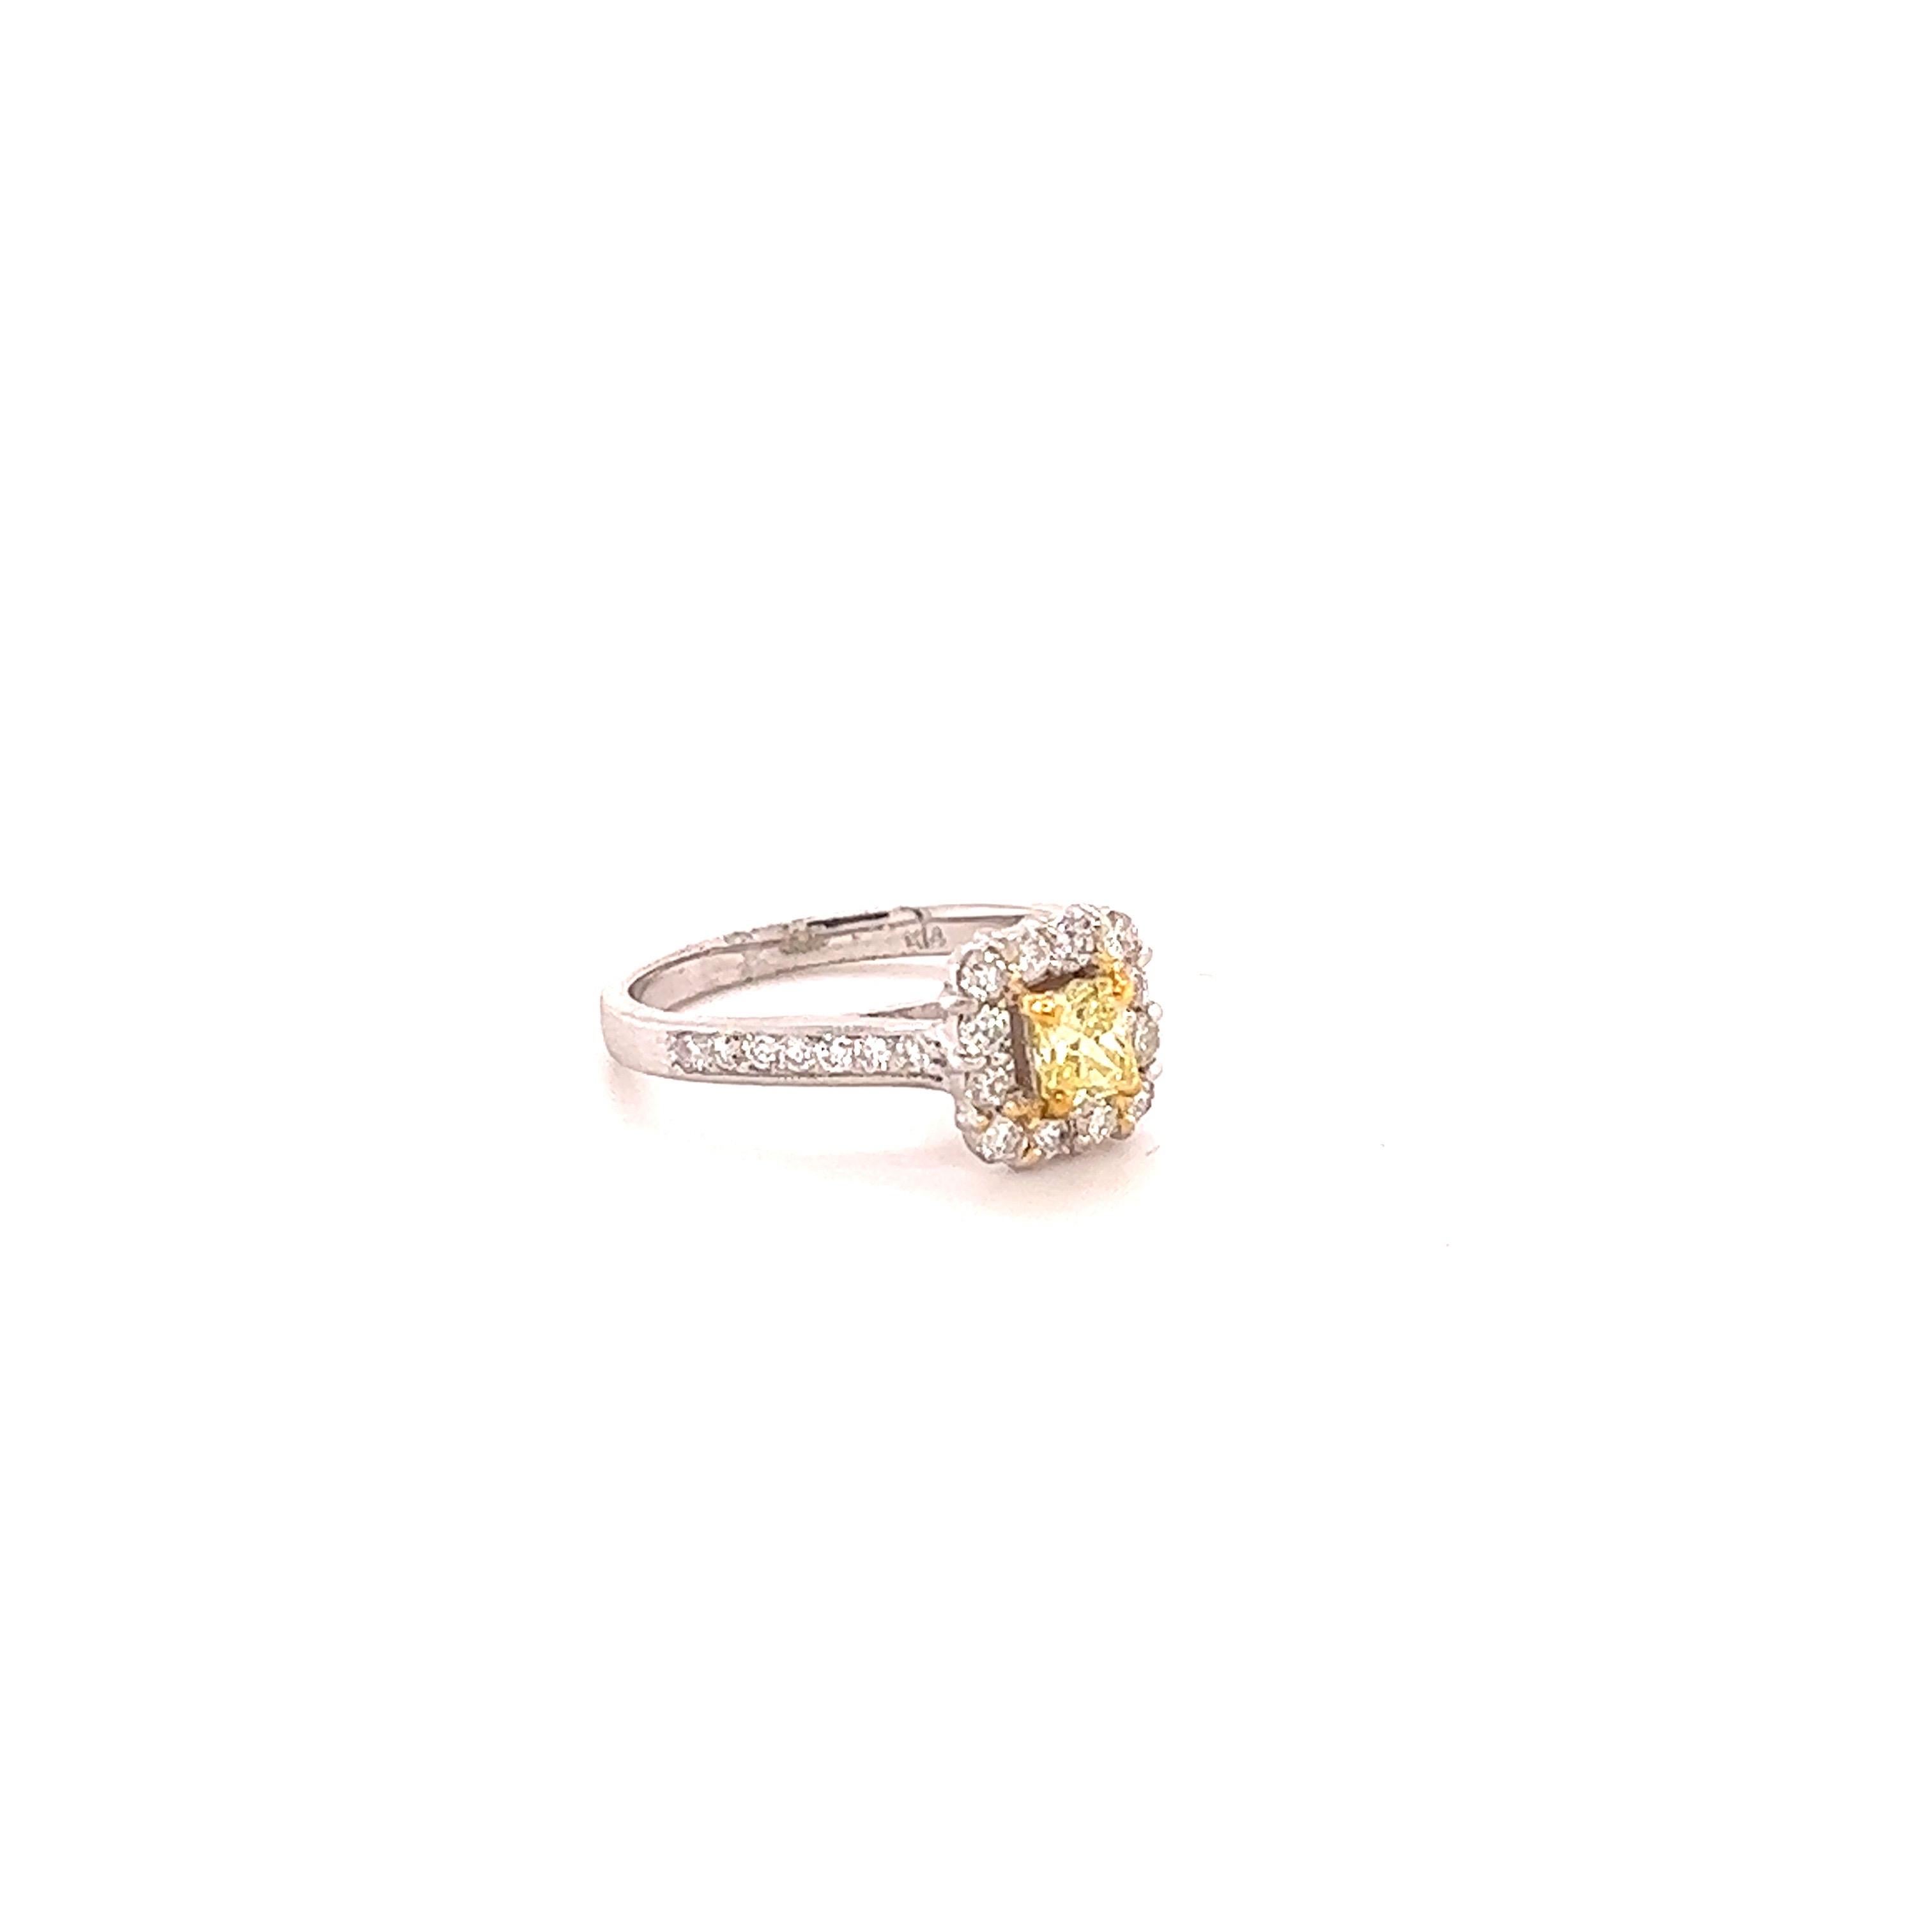 This beautiful engagement ring has a Square Cushion Cut Yellow Diamond that weighs 0.39 carats with a VS Clarity and Color is Fancy Yellow. The measurements of the Yellow Diamond are approximately 4 mm x 4 mm. There are 28 Round Cut Diamonds that